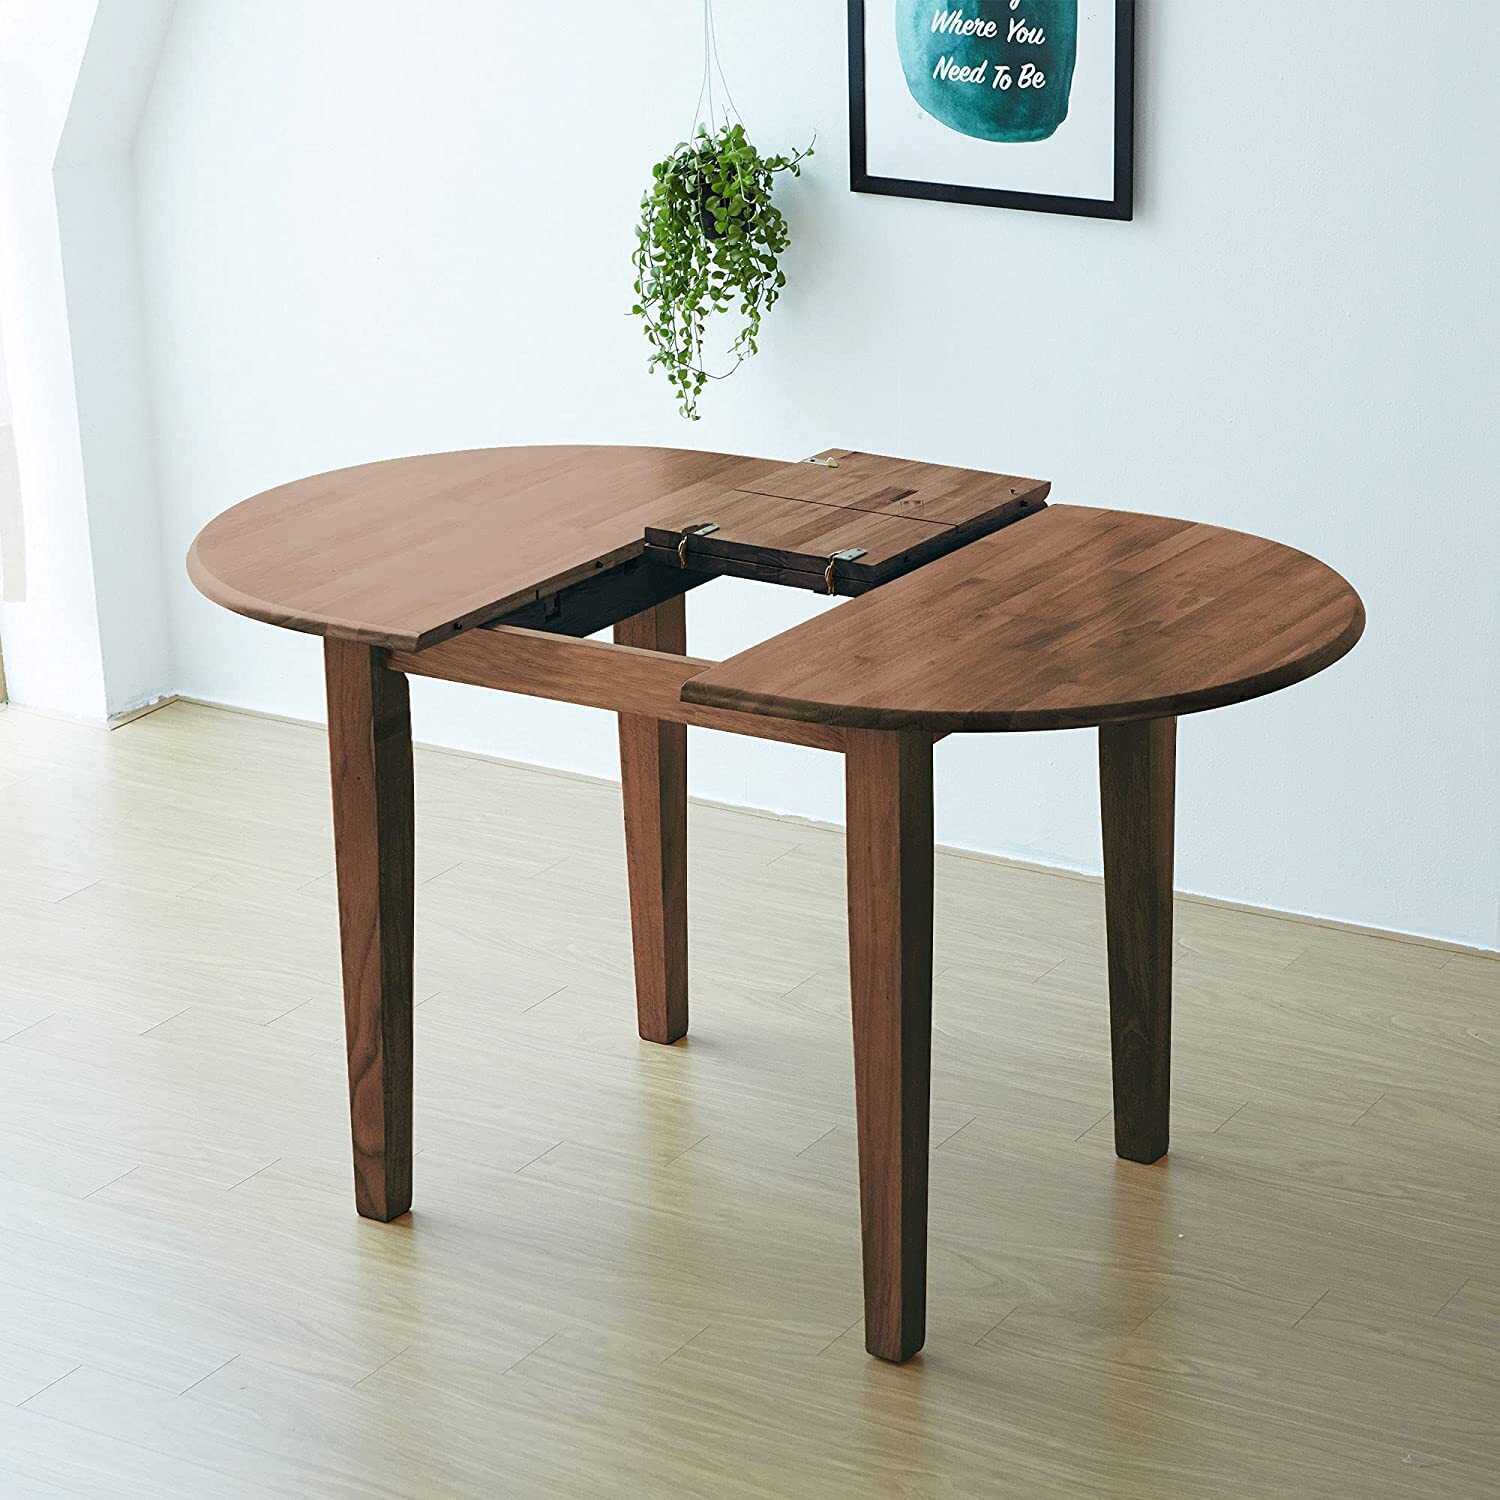 Expandable round/oval folding table in a light finish